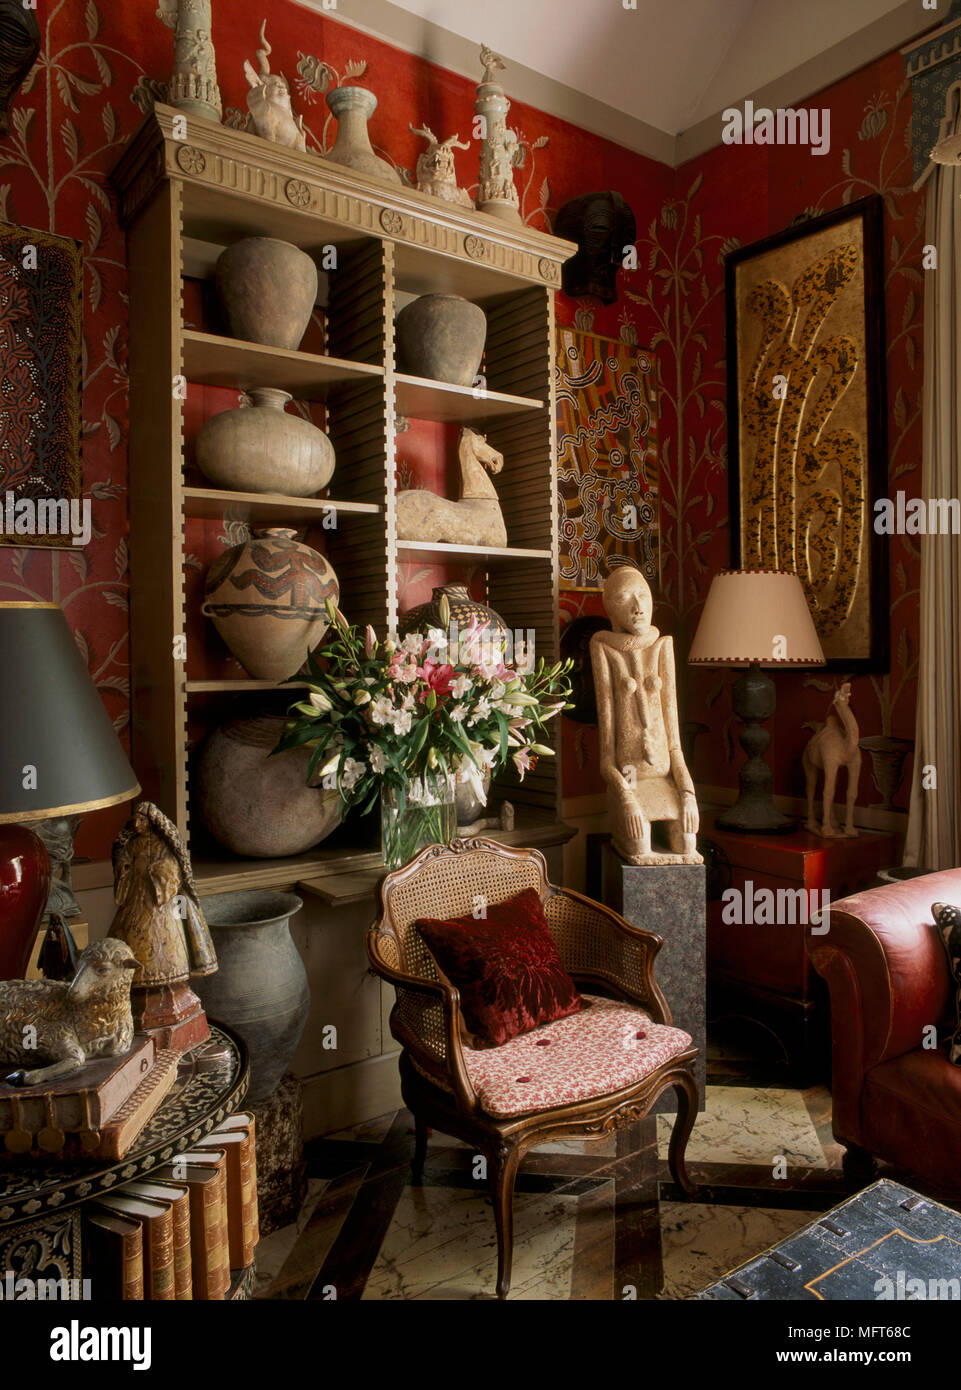 A detail of a traditional, red sitting room, a display of pottery vases,  figurines, statues and antiquities Stock Photo - Alamy